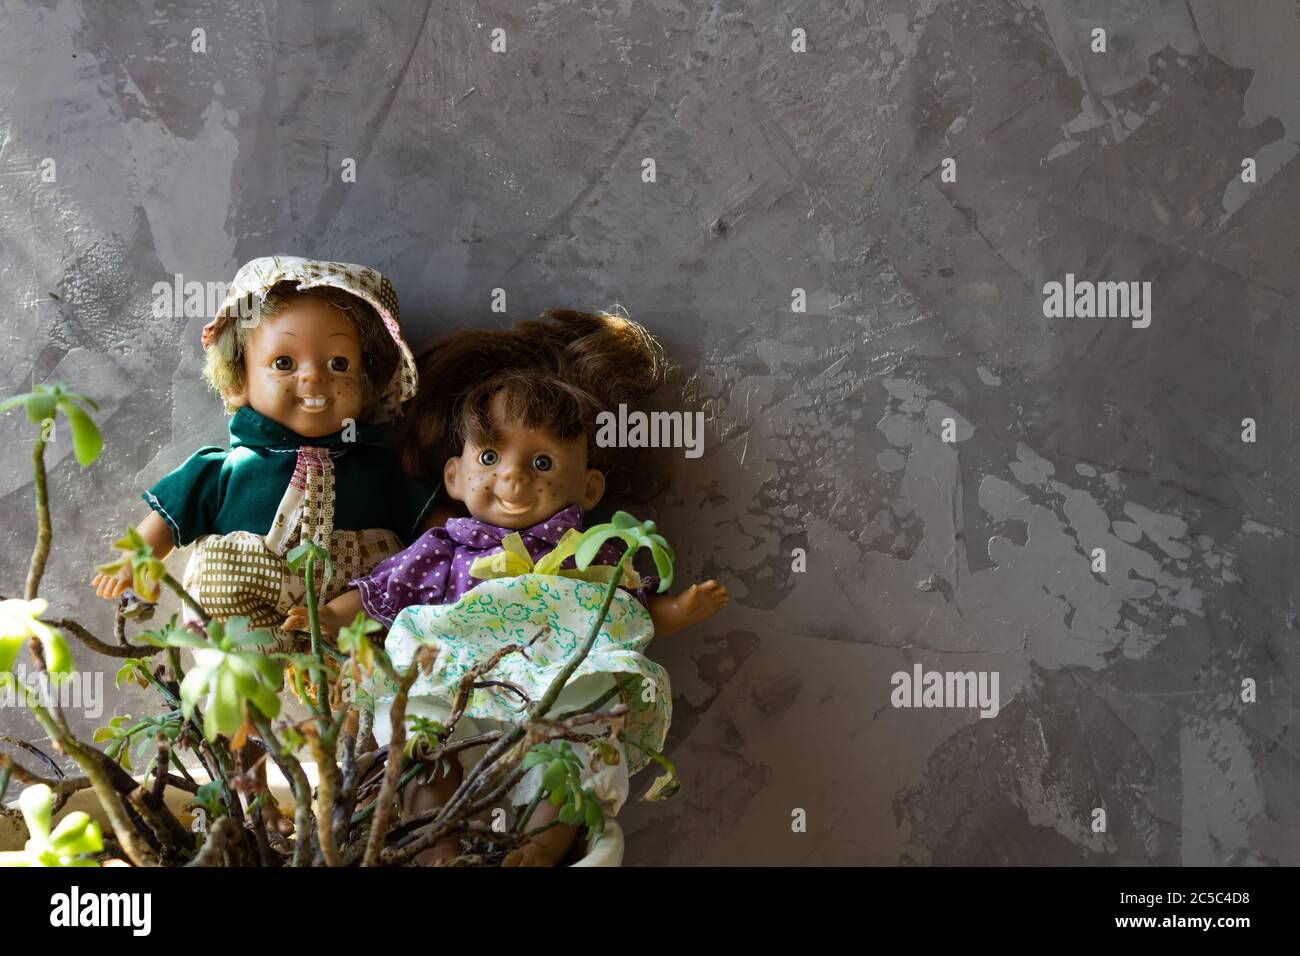 Old, scary, ugly dolls in front of concrete wall. Stock Photo